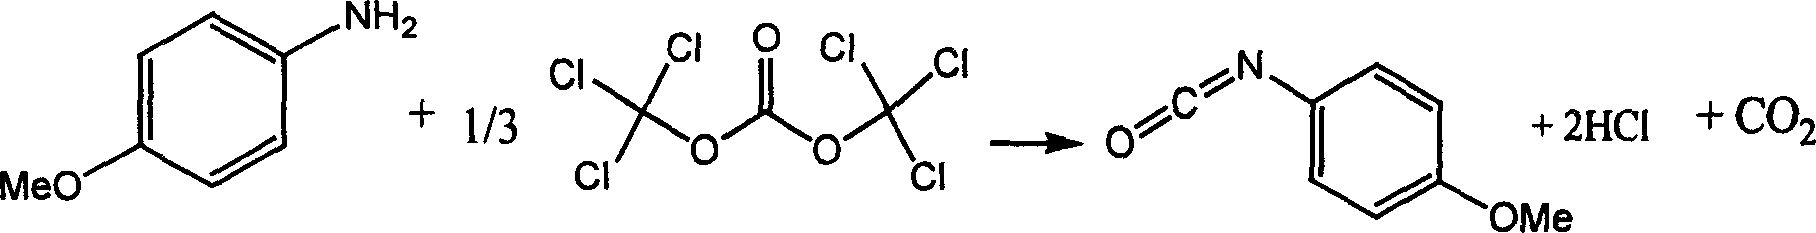 Chemical synthesis of p-methoxyphenyl isocyanate